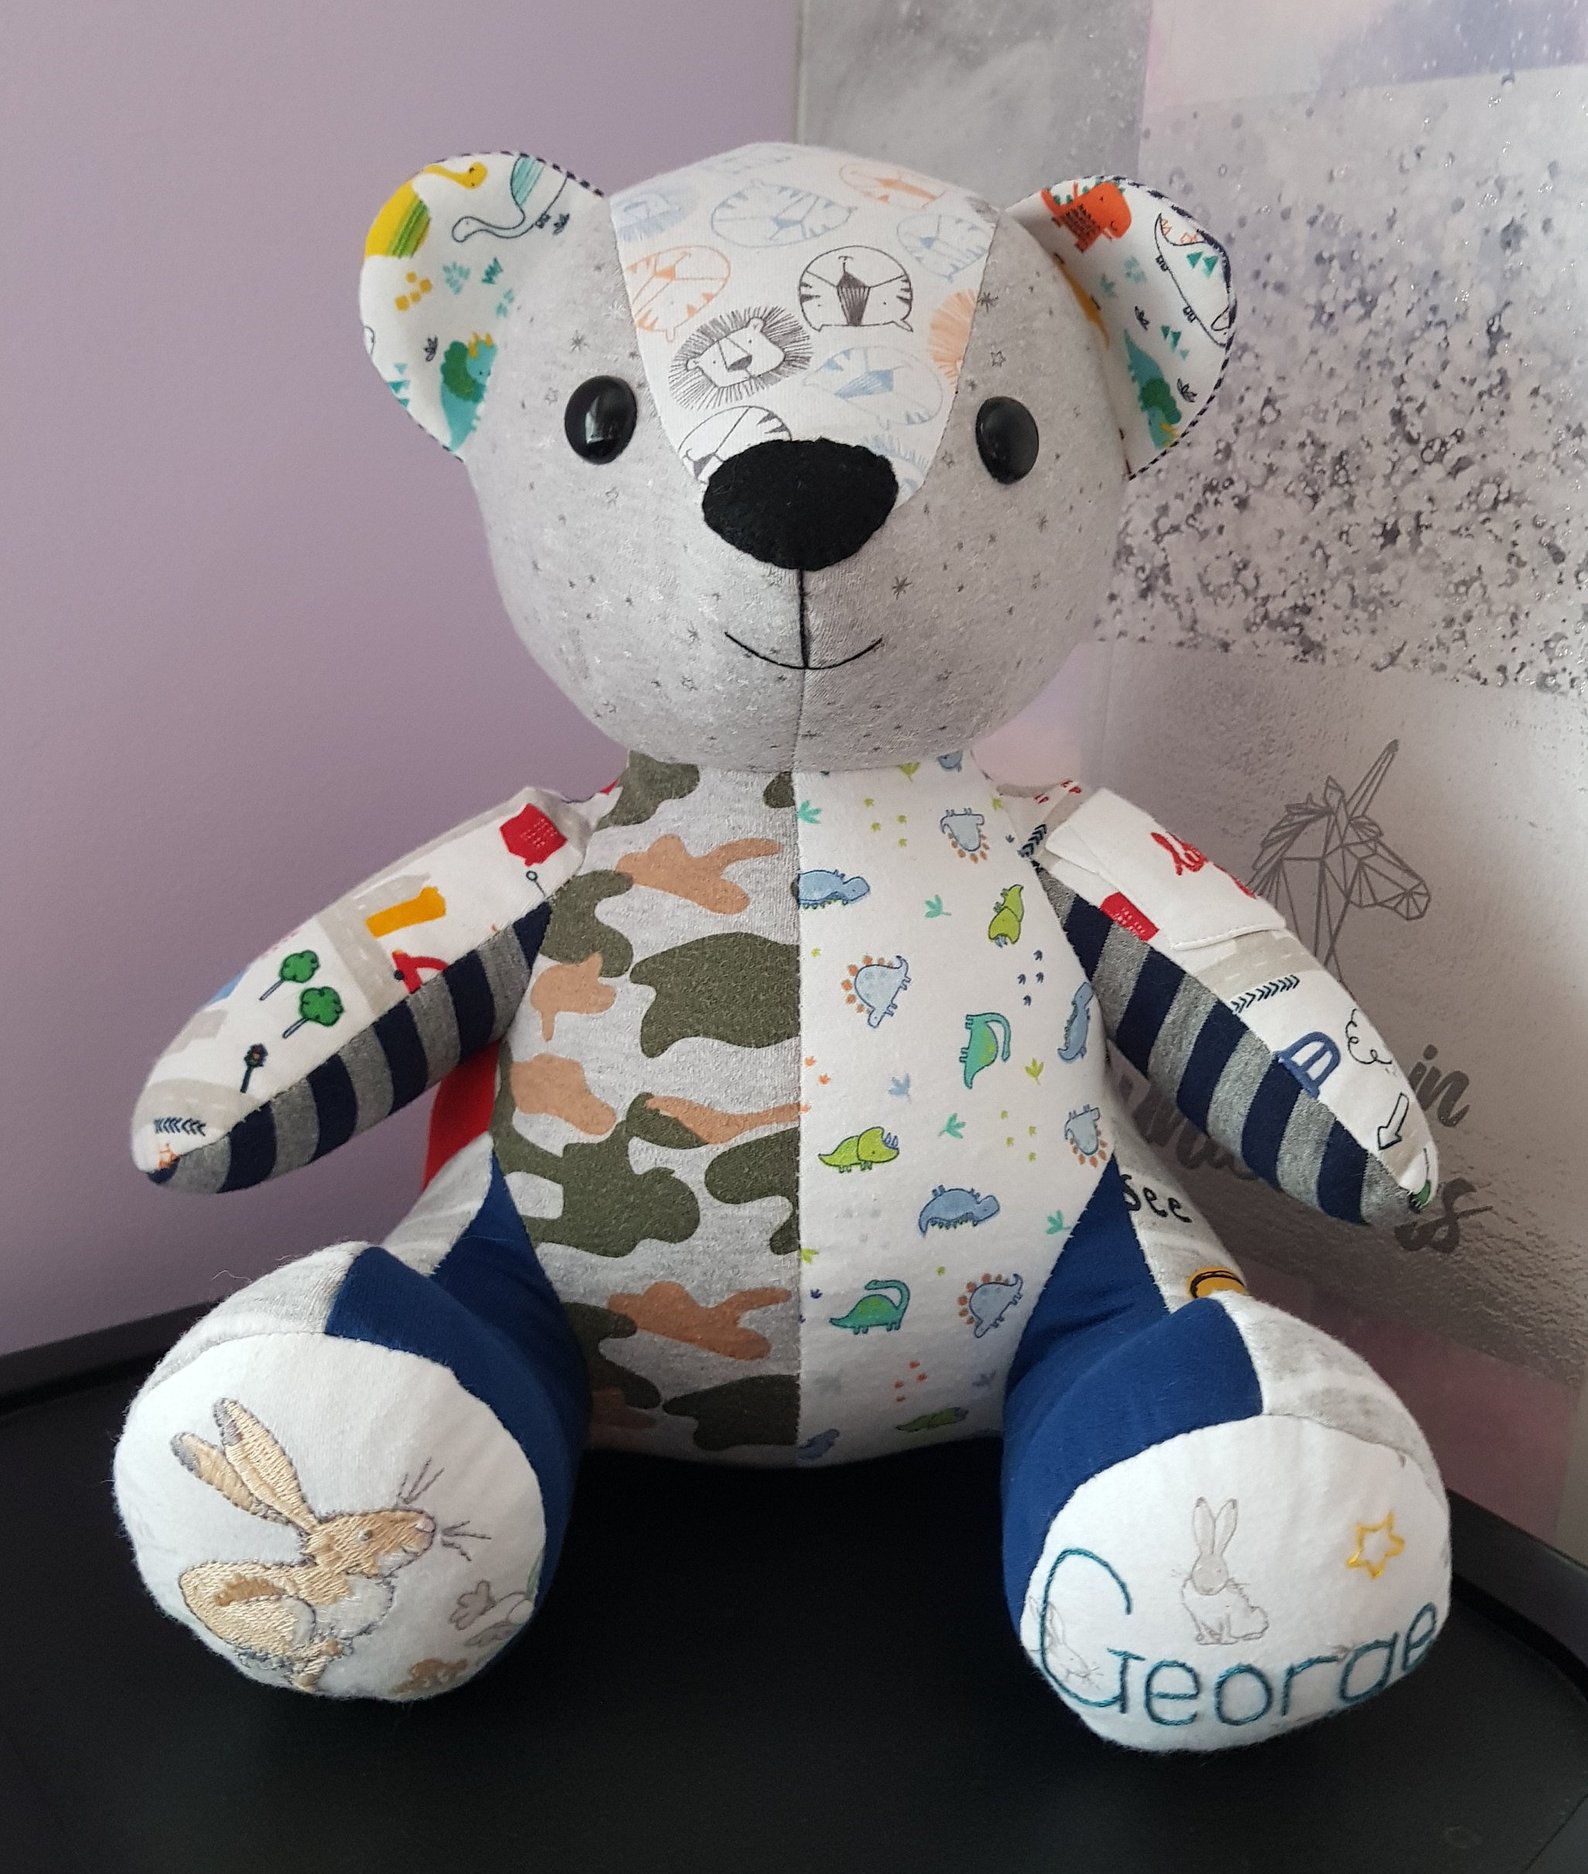 make a teddy out of old clothes